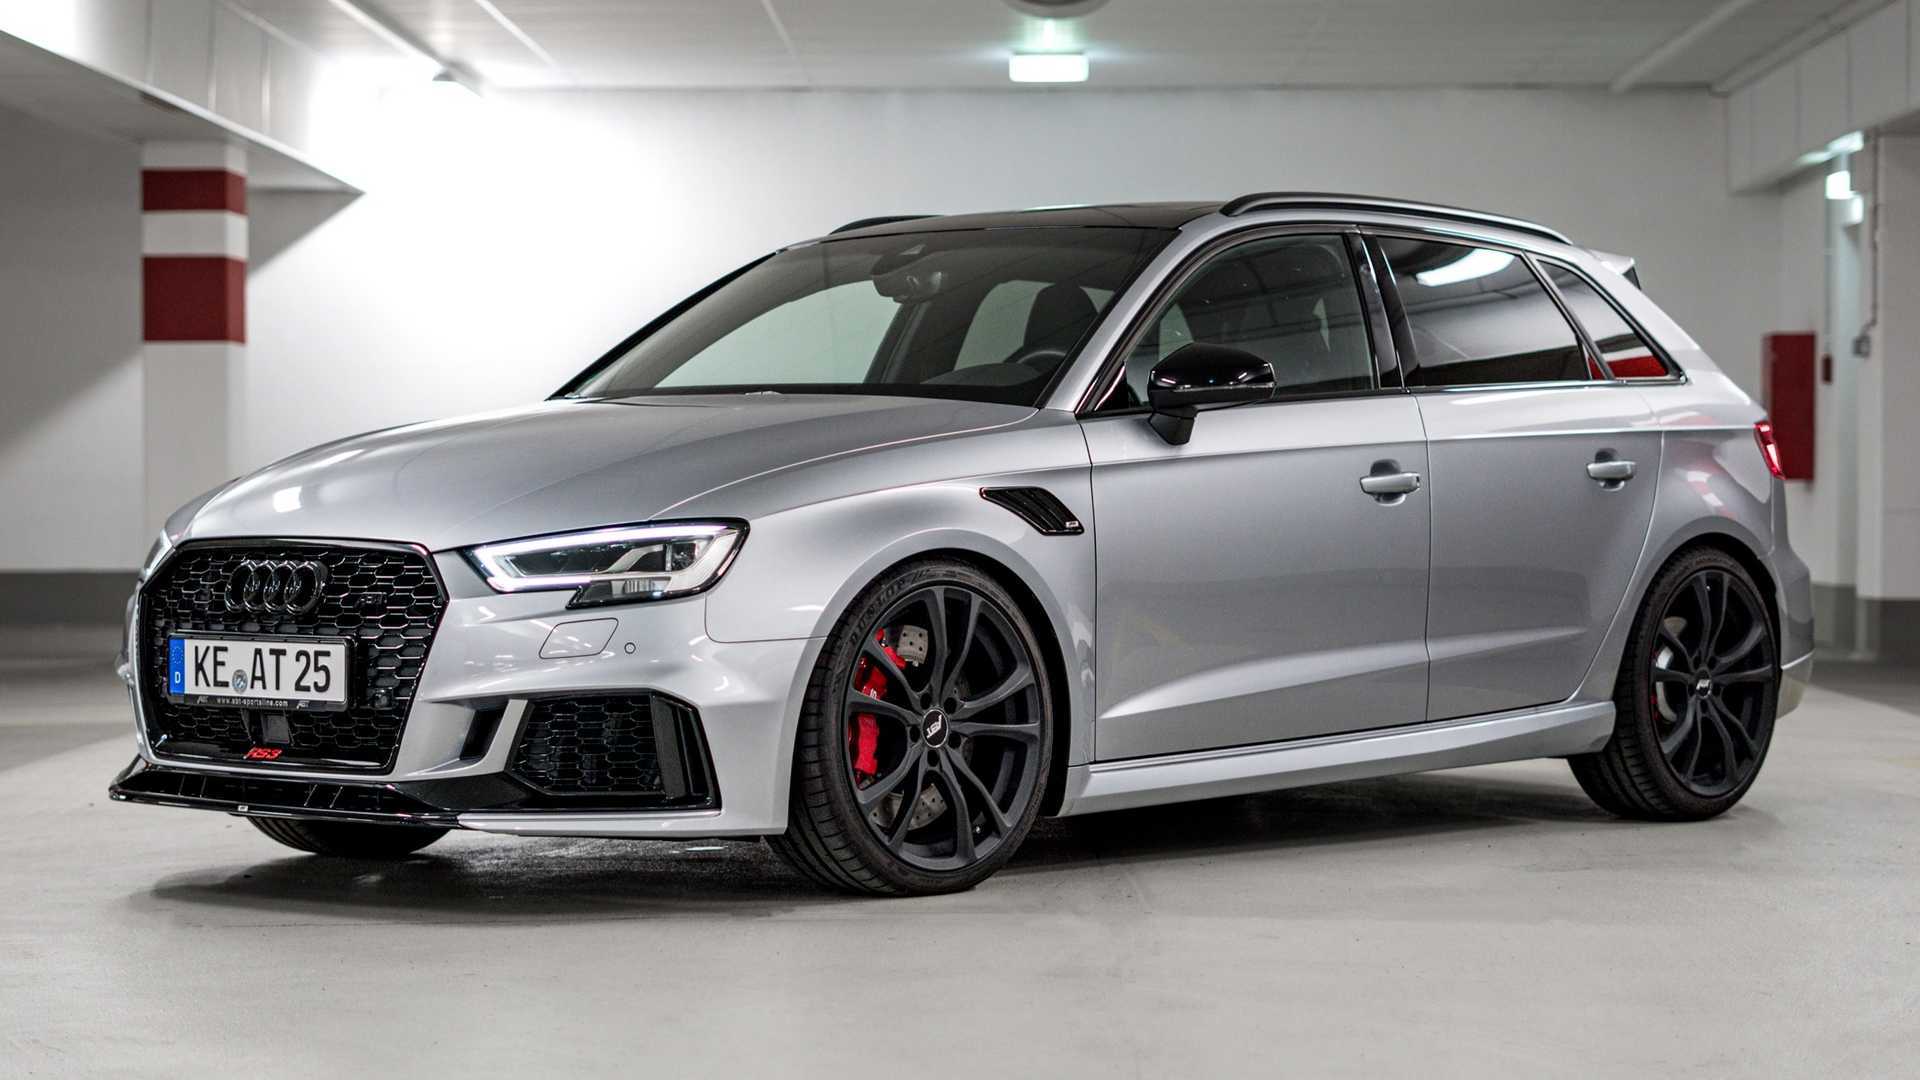 464-HP Audi RS3 Sportback By ABT Is A Hot Hatch Made Even Hotter